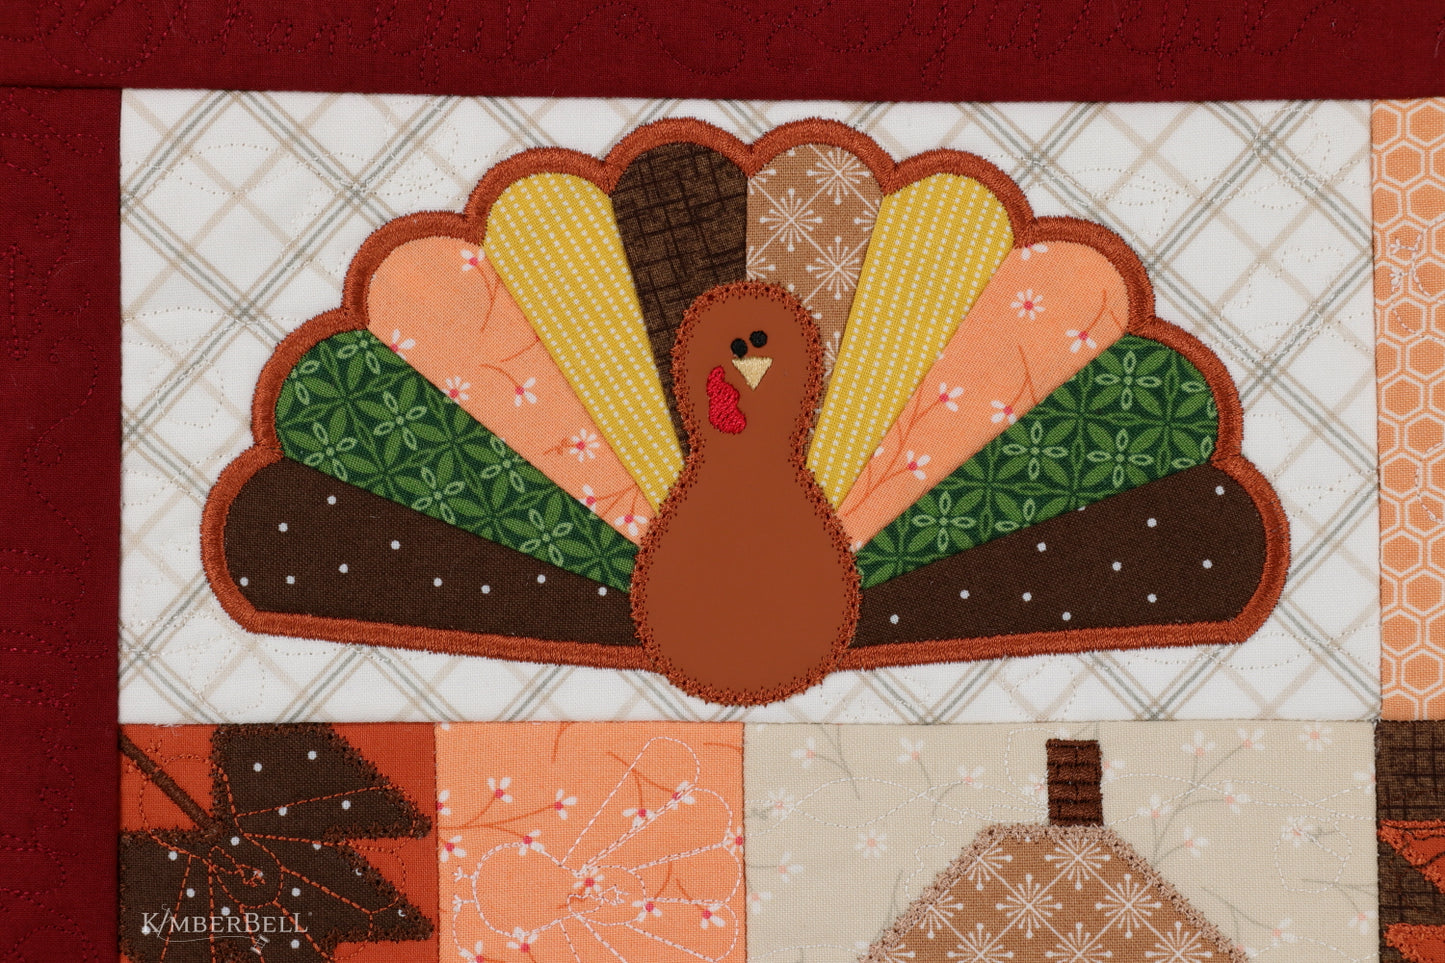 KimberBell In All Things Give Thanks 22"x22" Pillow, Fabric Kit